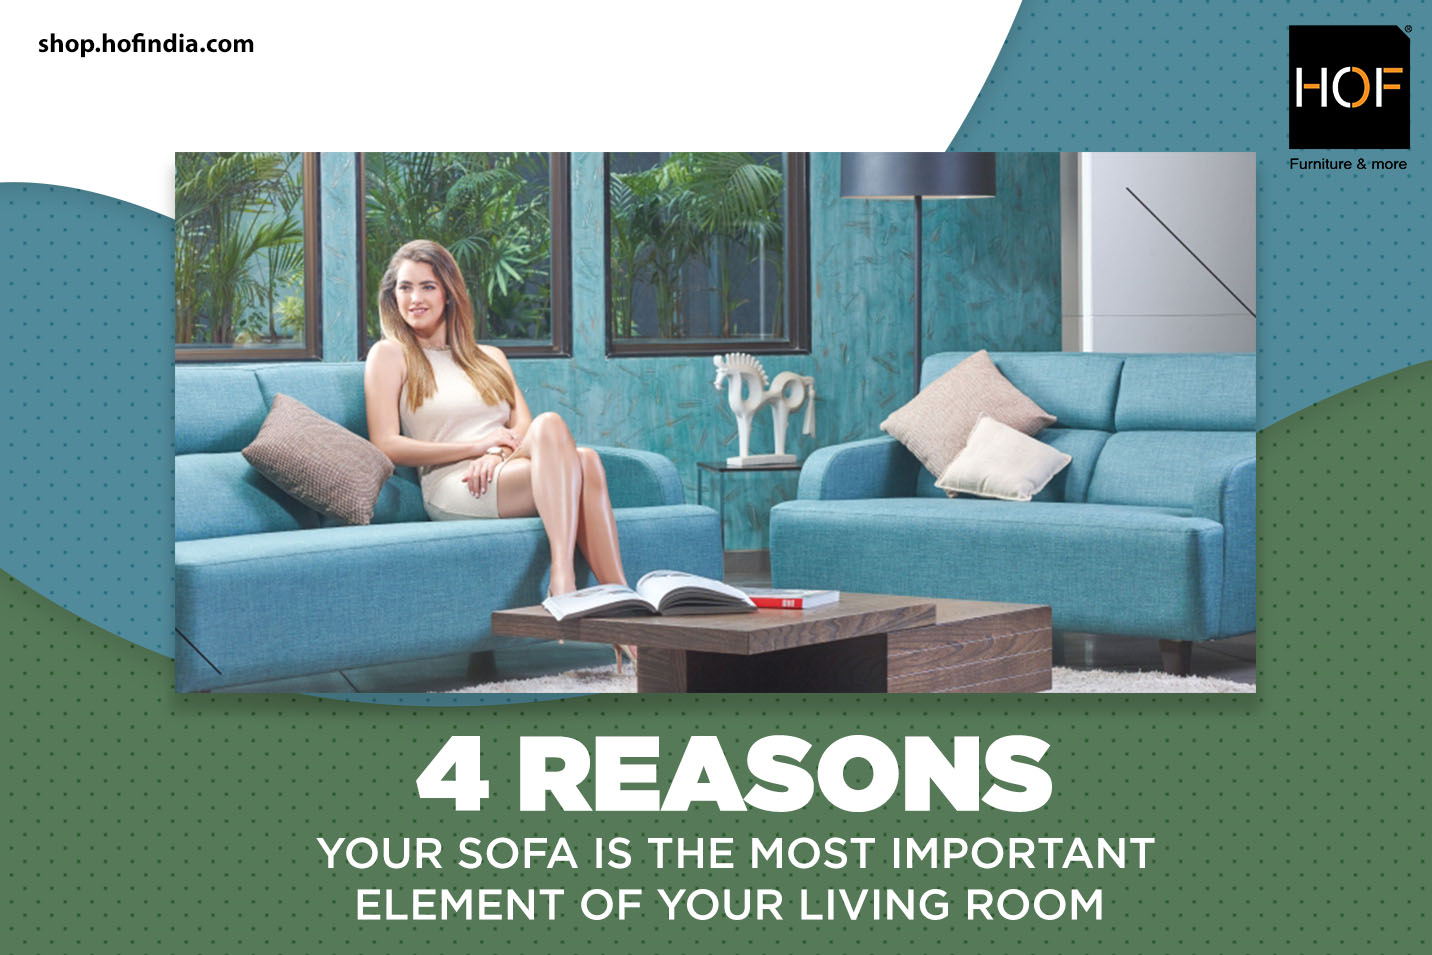 4 reasons your Sofa is the most important element